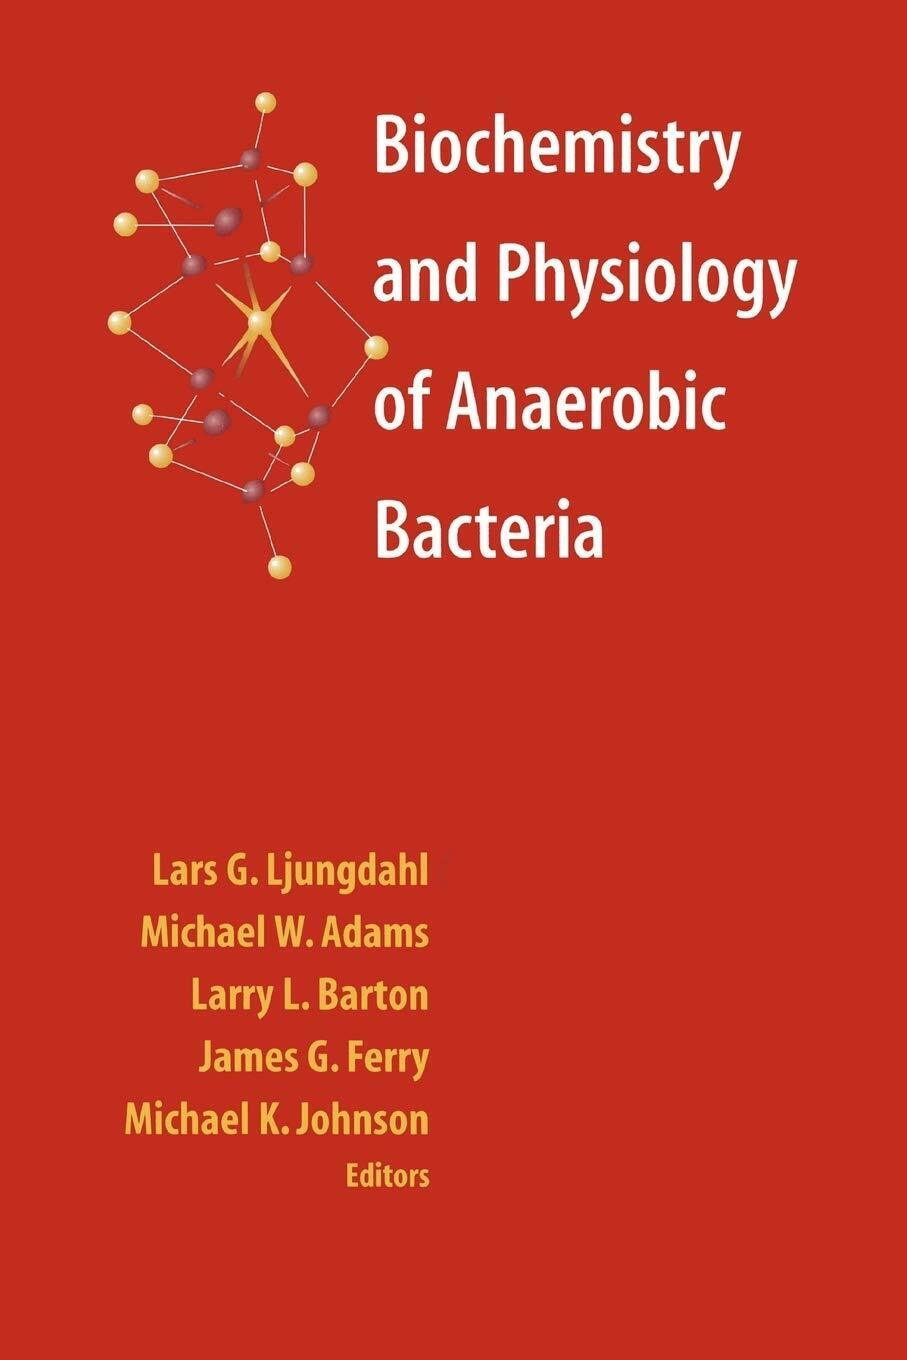 Biochemistry and Physiology of Anaerobic Bacteria - Lars G. Ljungdahl - 2010